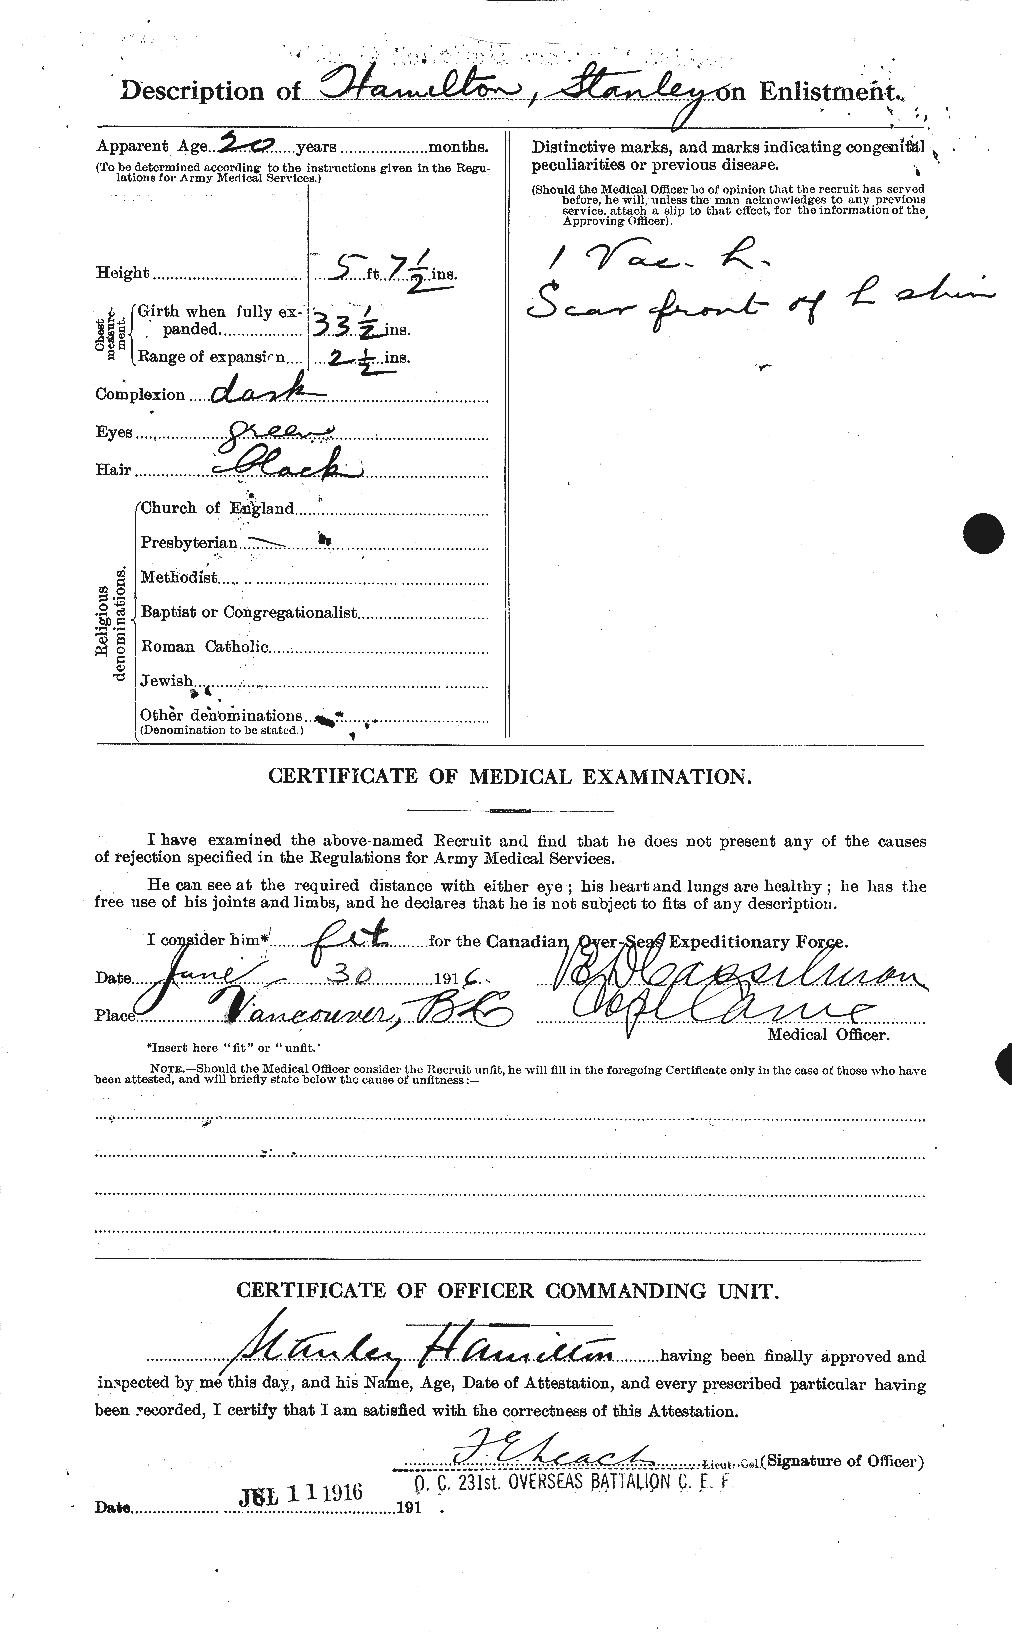 Personnel Records of the First World War - CEF 373314b